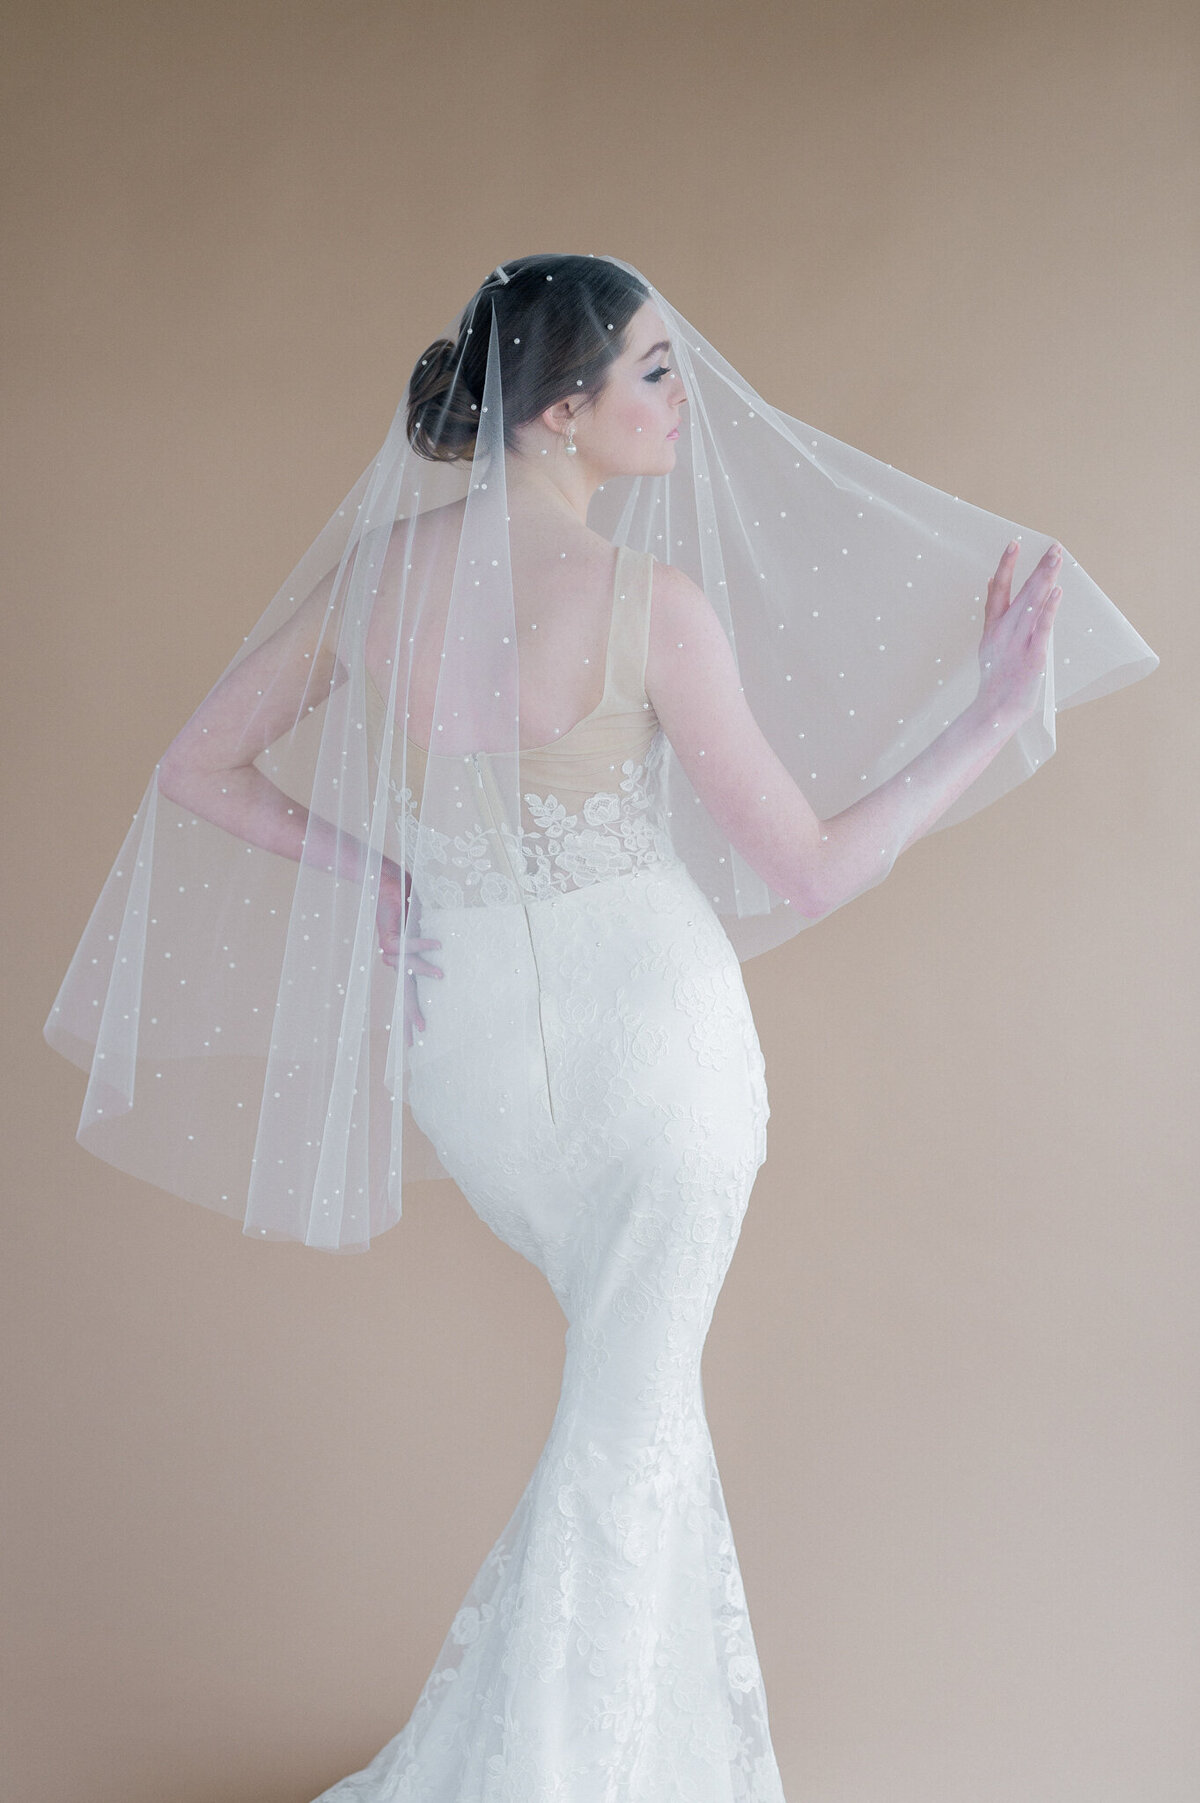 Romantic and feminine bridal veil with pearl detail, by Blair Nadeau Bridal Adornments, romantic and modern wedding jewelry based in Brampton. Featured on the Brontë Bride Vendor Guide.